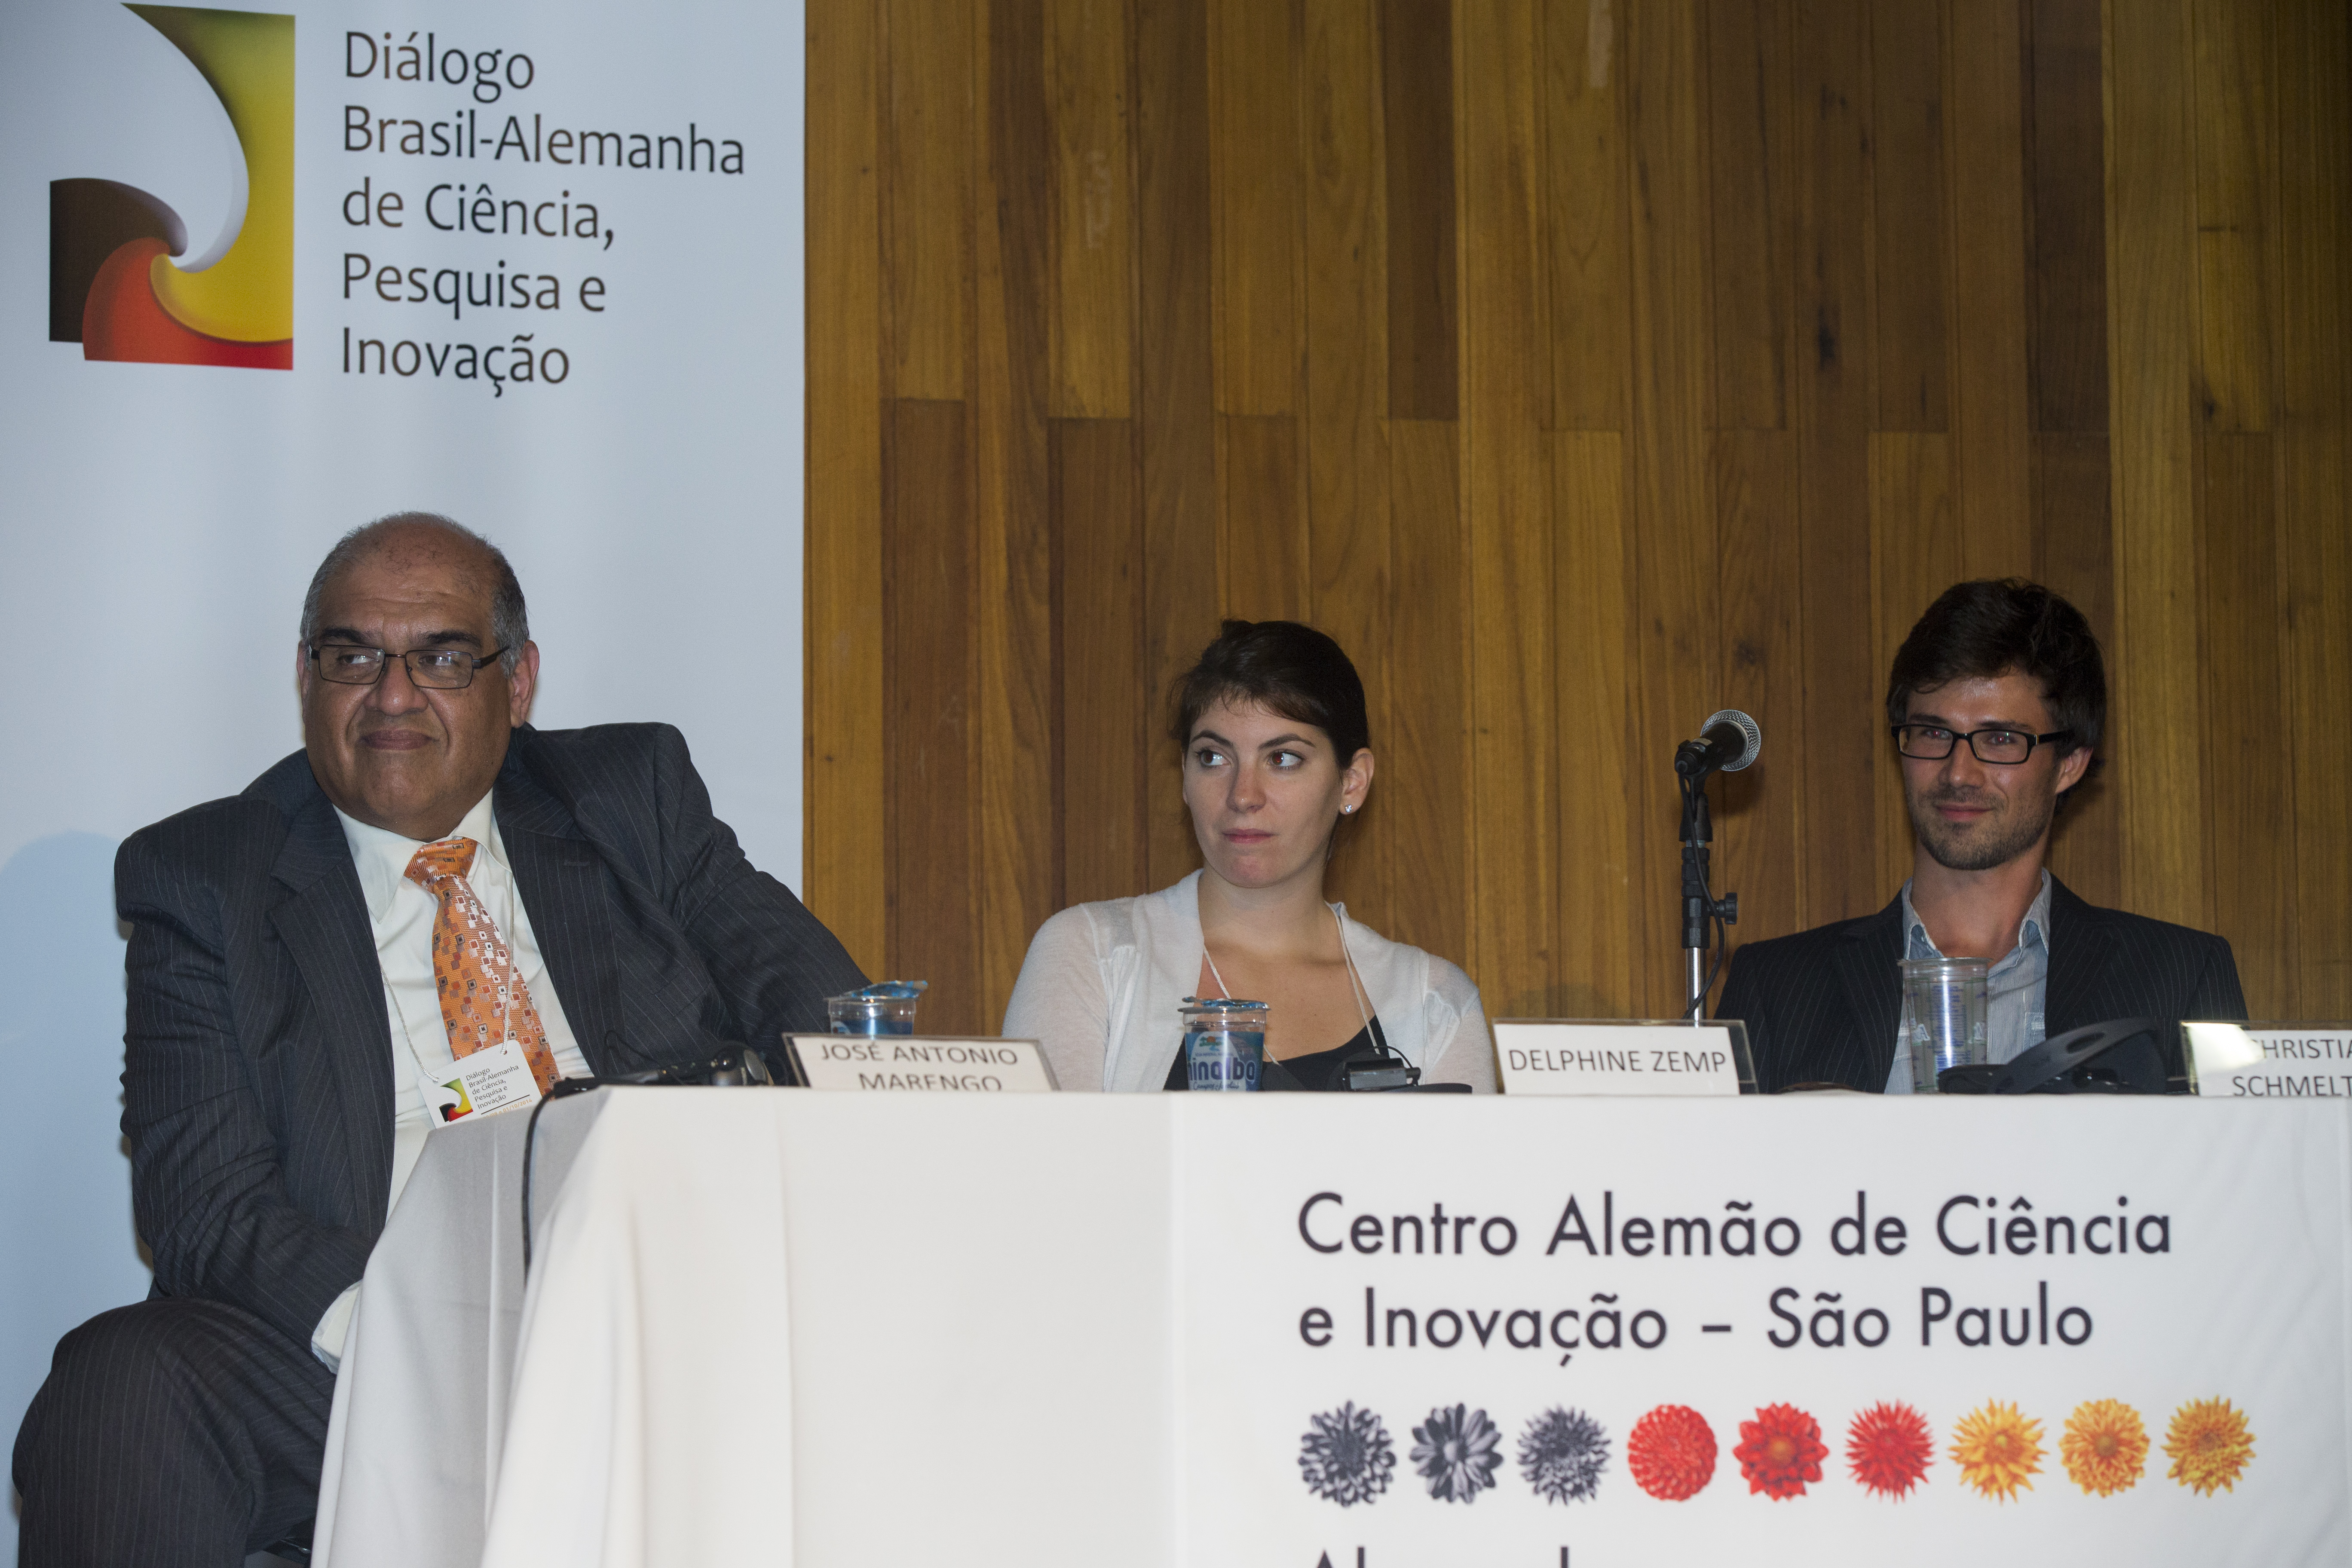 Professor Dr. José A. Marengo (INPE) with doctoral researchers Delphine Zemp and Christian Schmeltzer speaking at the 3rd German-Brazilian Dialogue on Science, Research and Innovation in São Paulo in 2014.